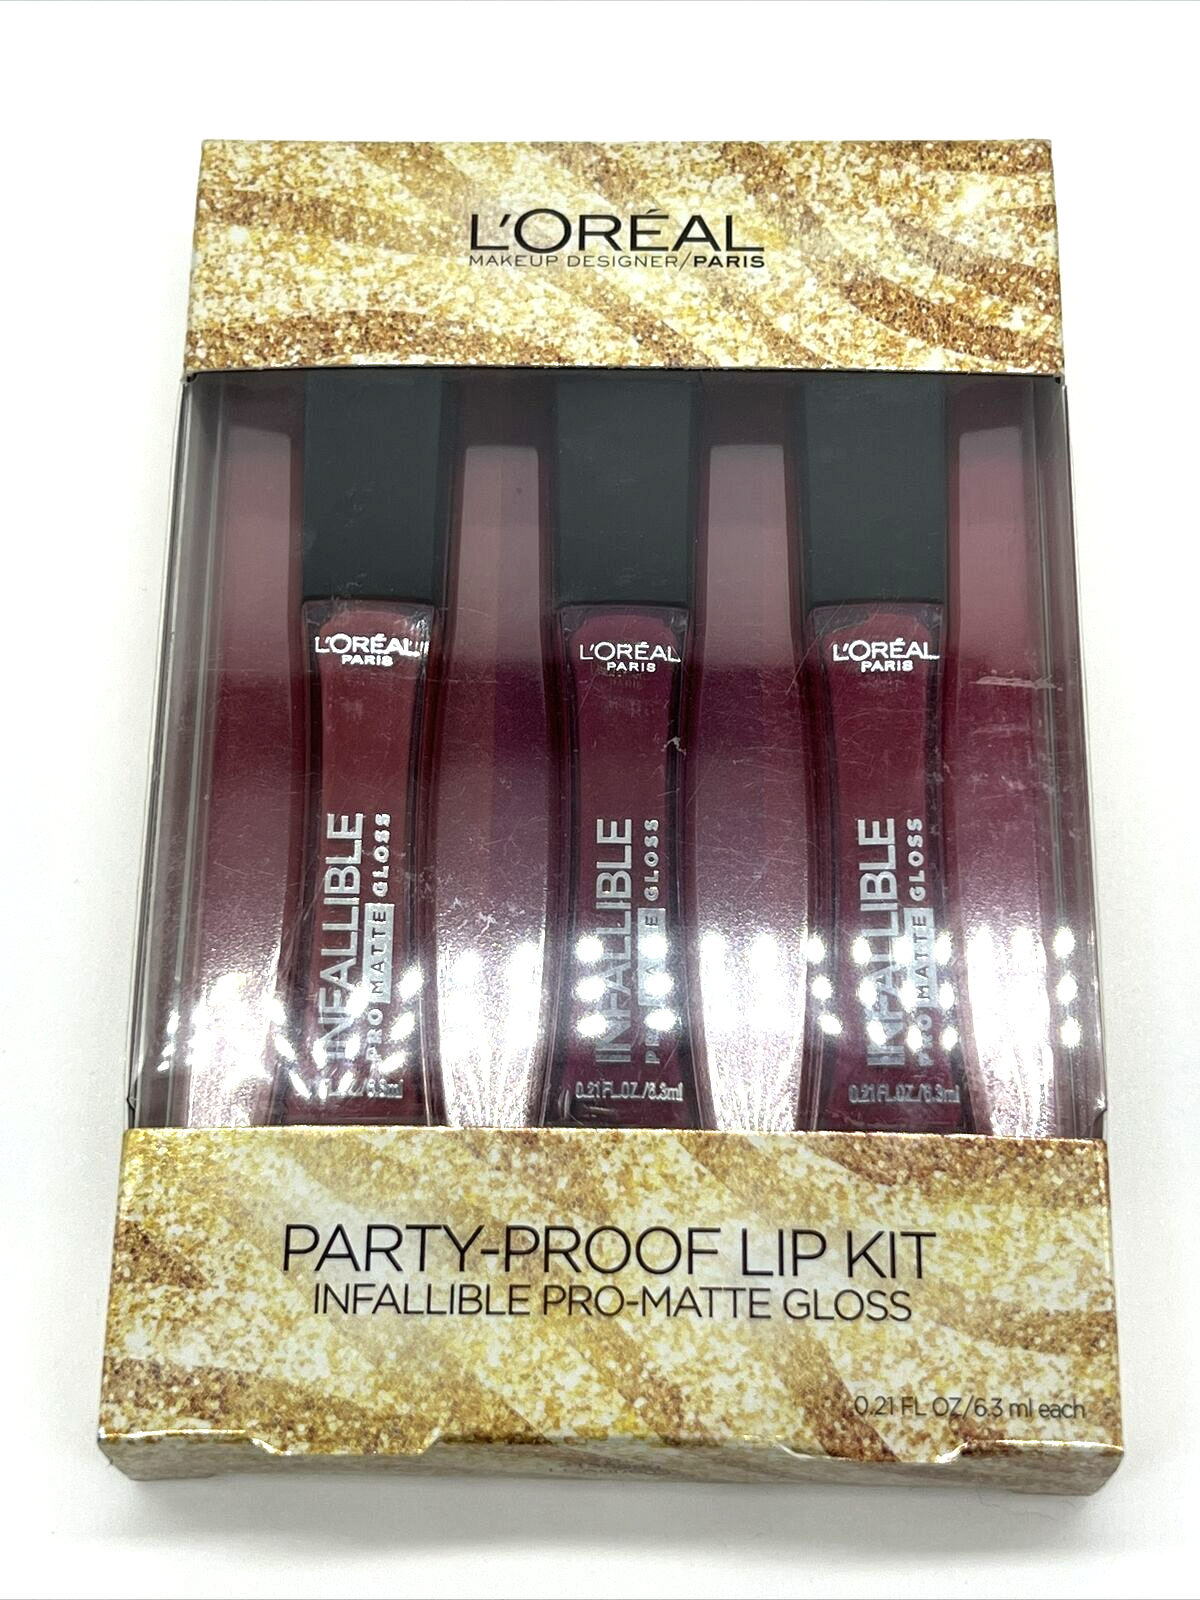 Primary image for Loreal Party Proof Lip Kit 3 Infallible Pro-Matte Gloss Brand New Gift Box